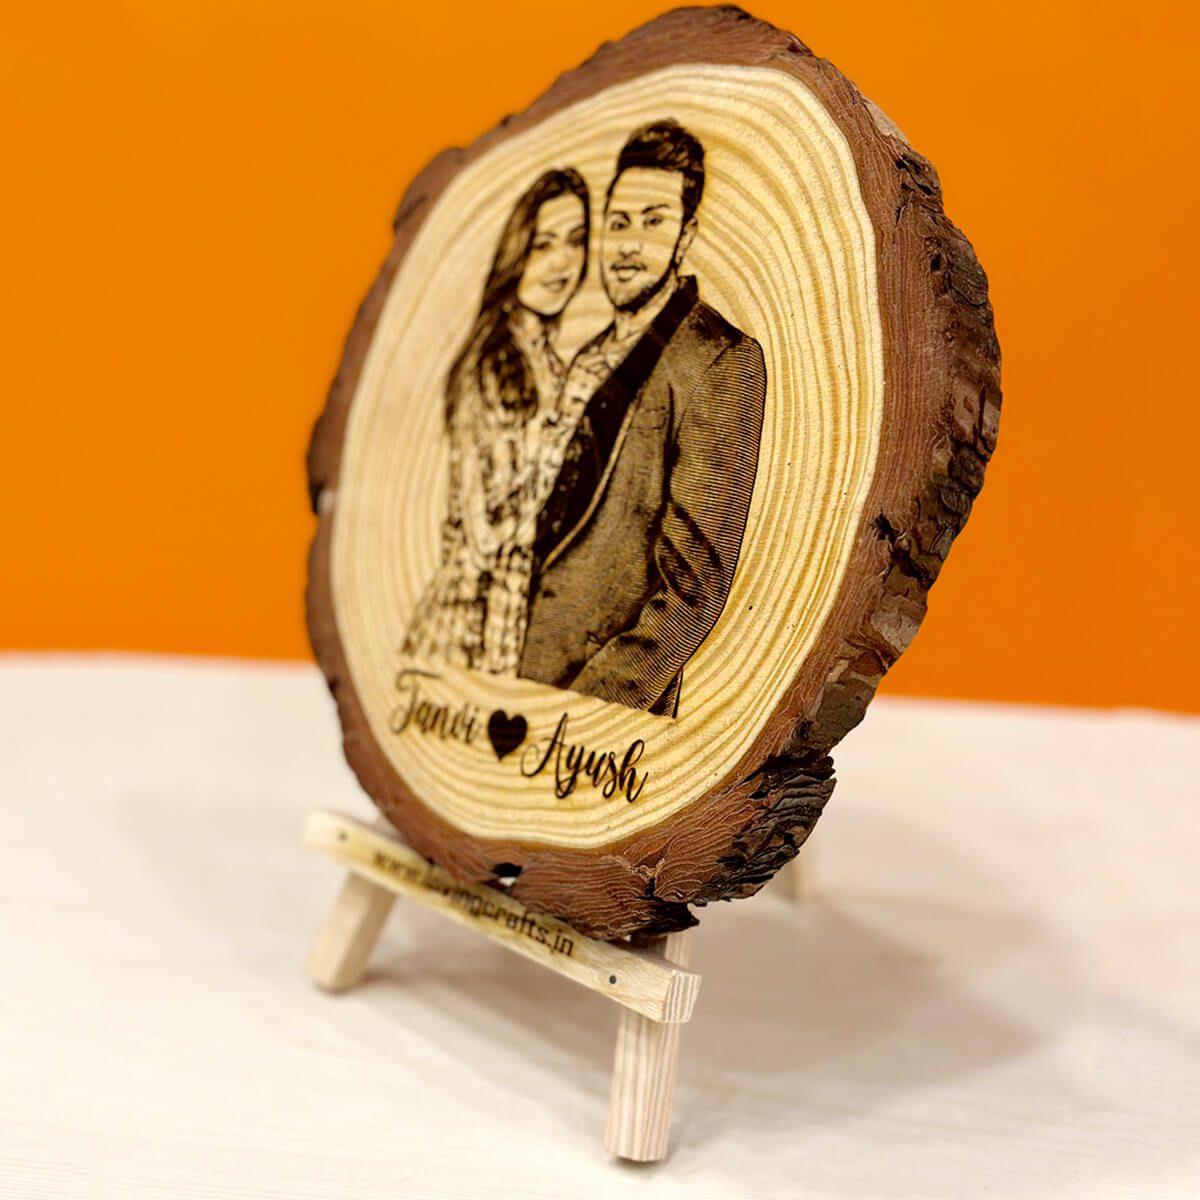 Wooden Slice Engraved Photo Frame For Couple (5 To 8 Inches)